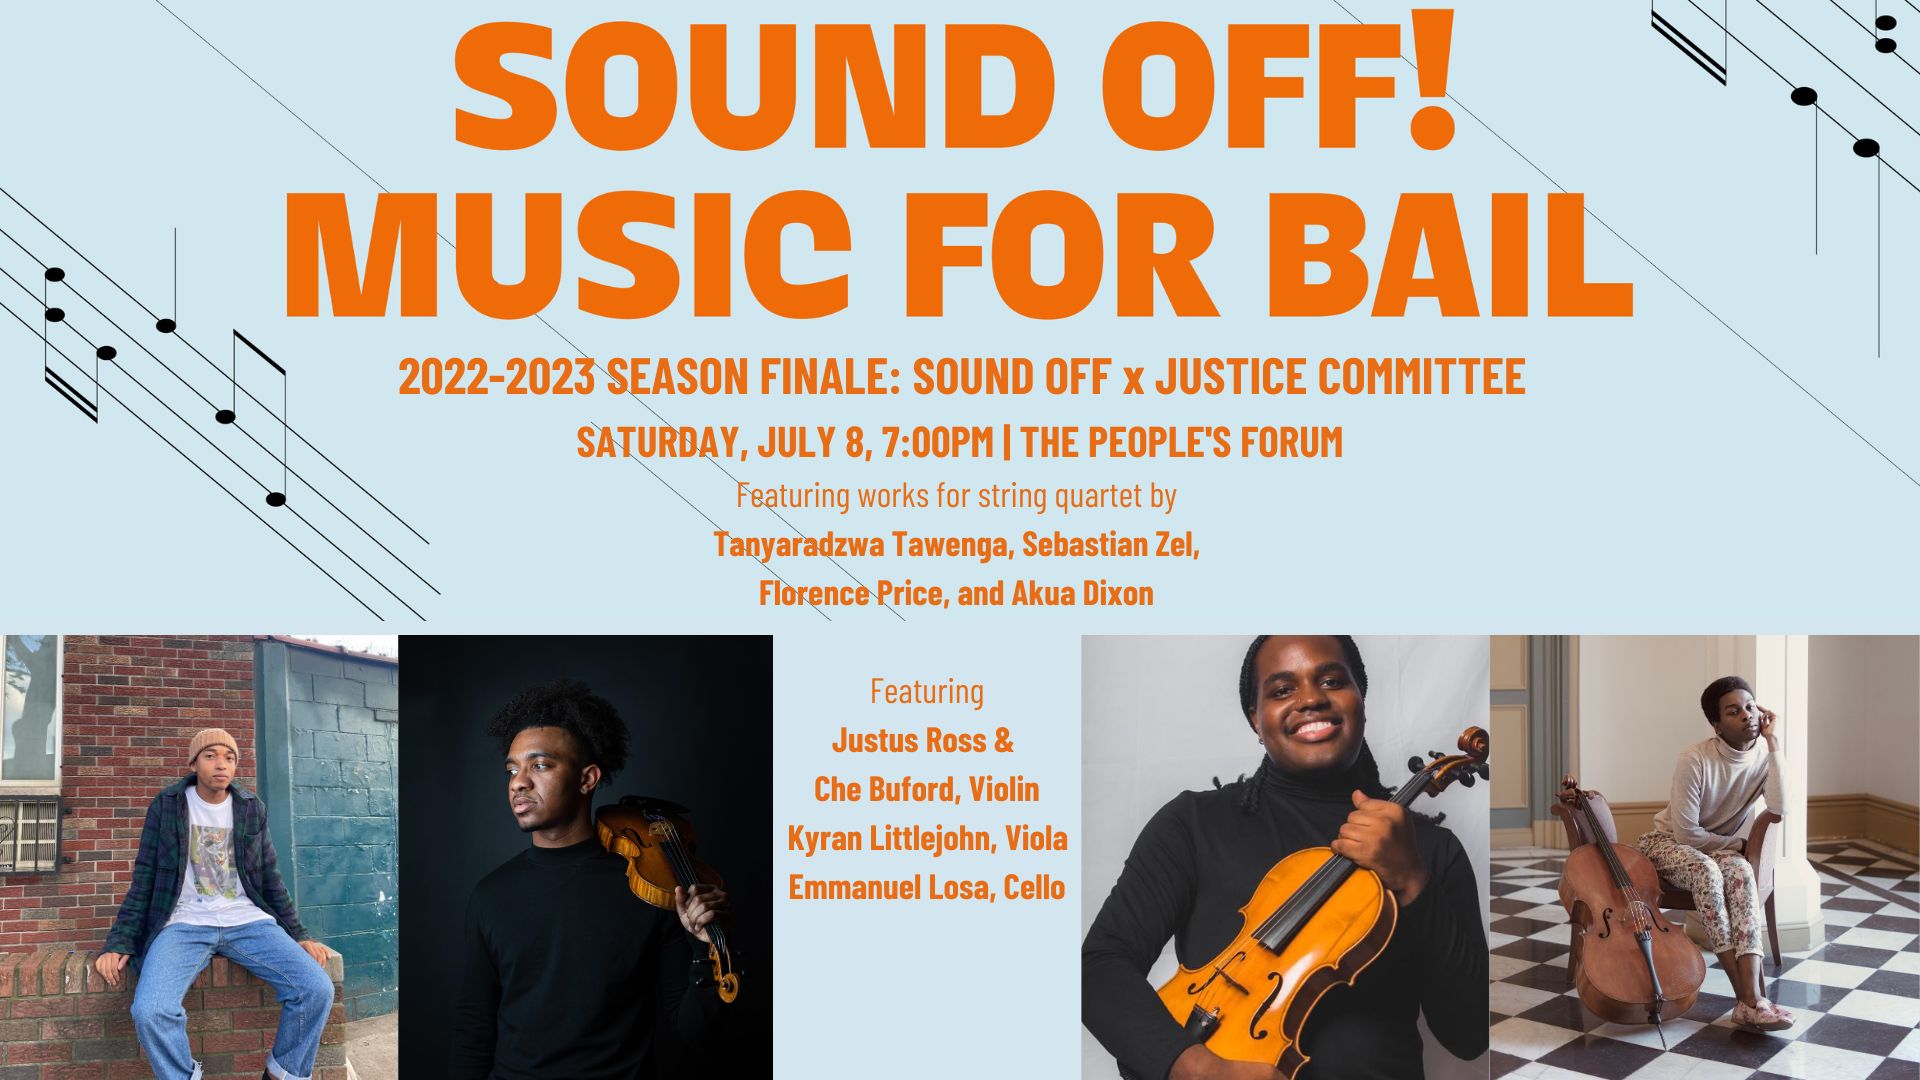 sne hvid klasse Hotel The People's Forum | Sound Off: Music for Bail July Concert - The People's  Forum